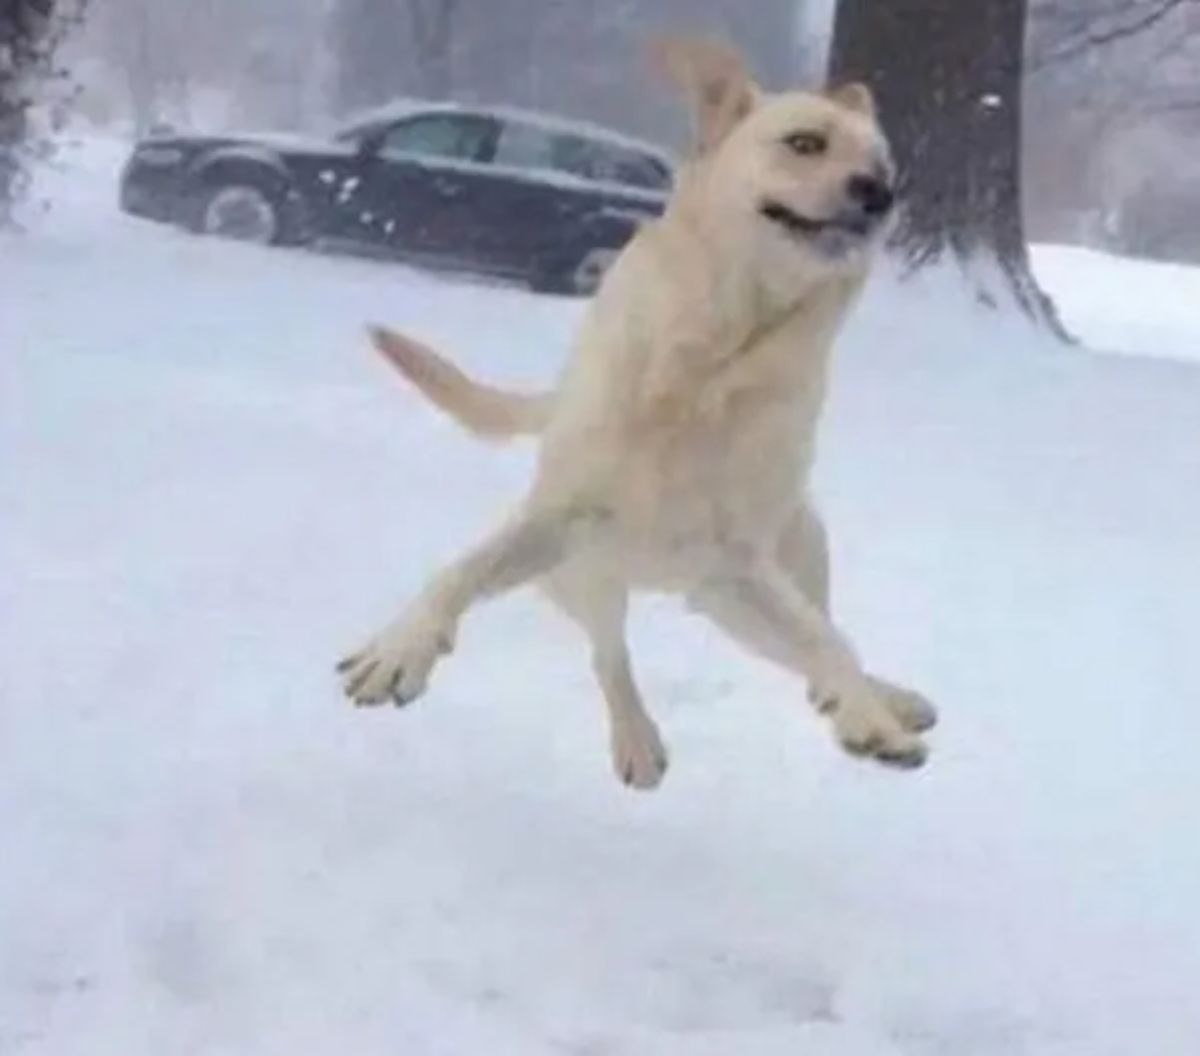 light brown dog jumping in the air in a snowy area